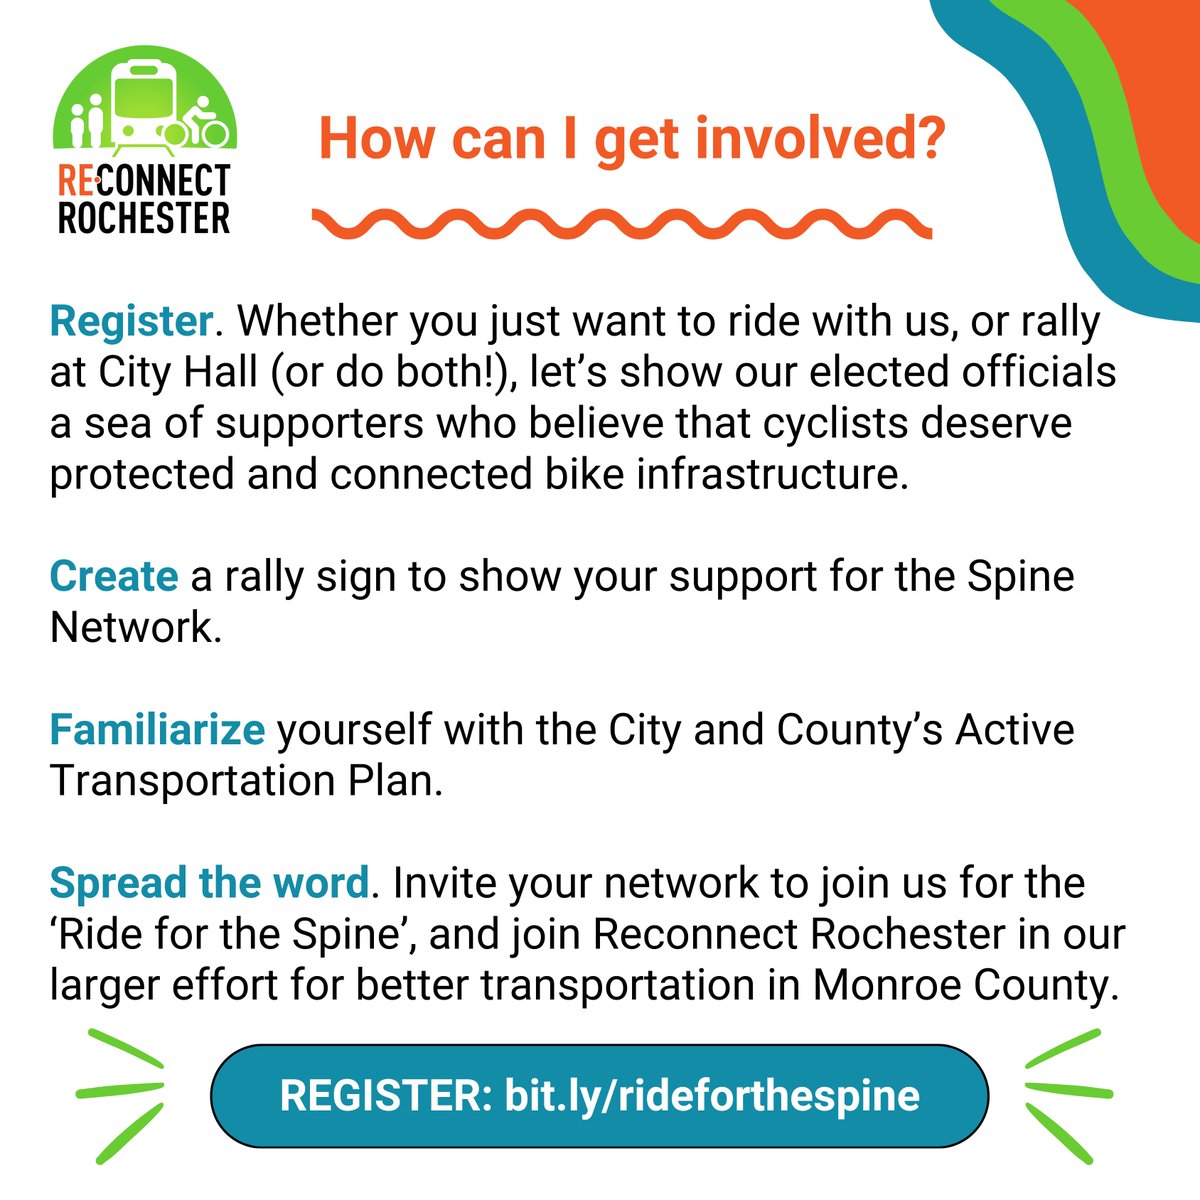 ✨SAVE THE DATE✨ Join Reconnect Rochester for a FREE ride and rally event on Friday, May 3rd to show our elected officials community support for a seamless and protected 'Bike Spine Network' that accomodates riders of all ages and abilities. bit.ly/rideforthespine